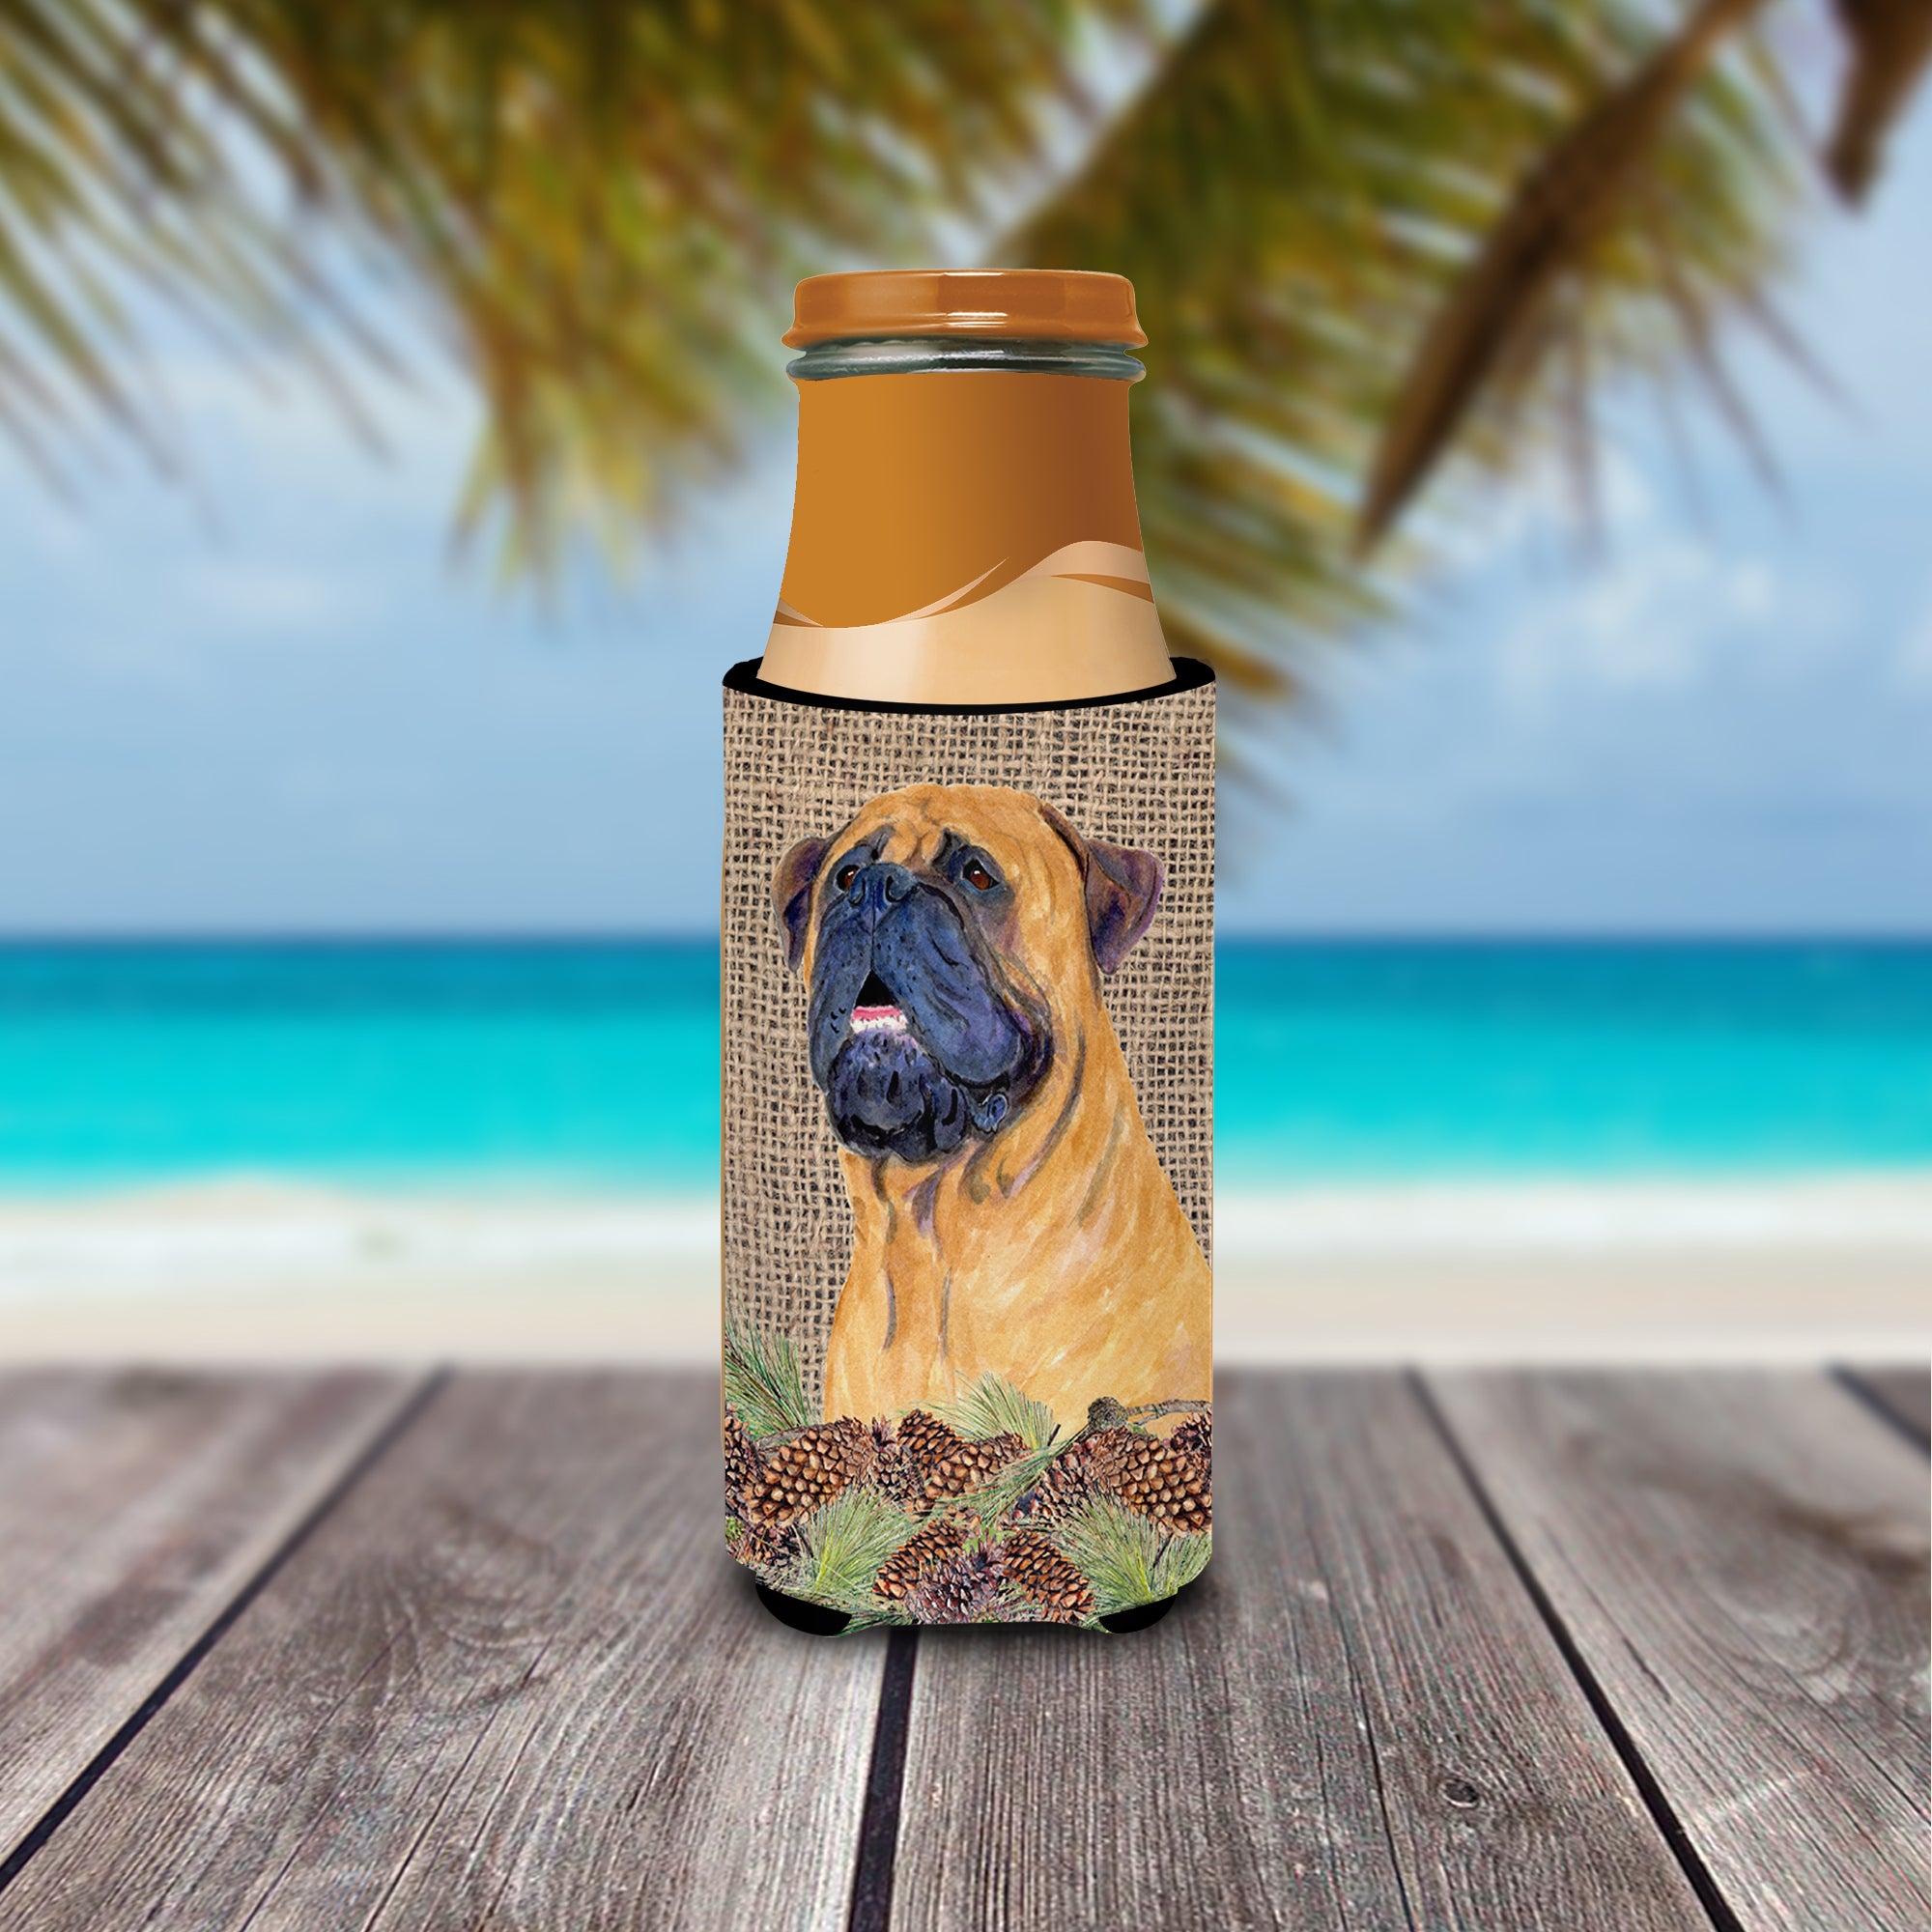 Bullmastiff on Faux Burlap with Pine Cones Ultra Beverage Insulators for slim cans SS4062MUK.